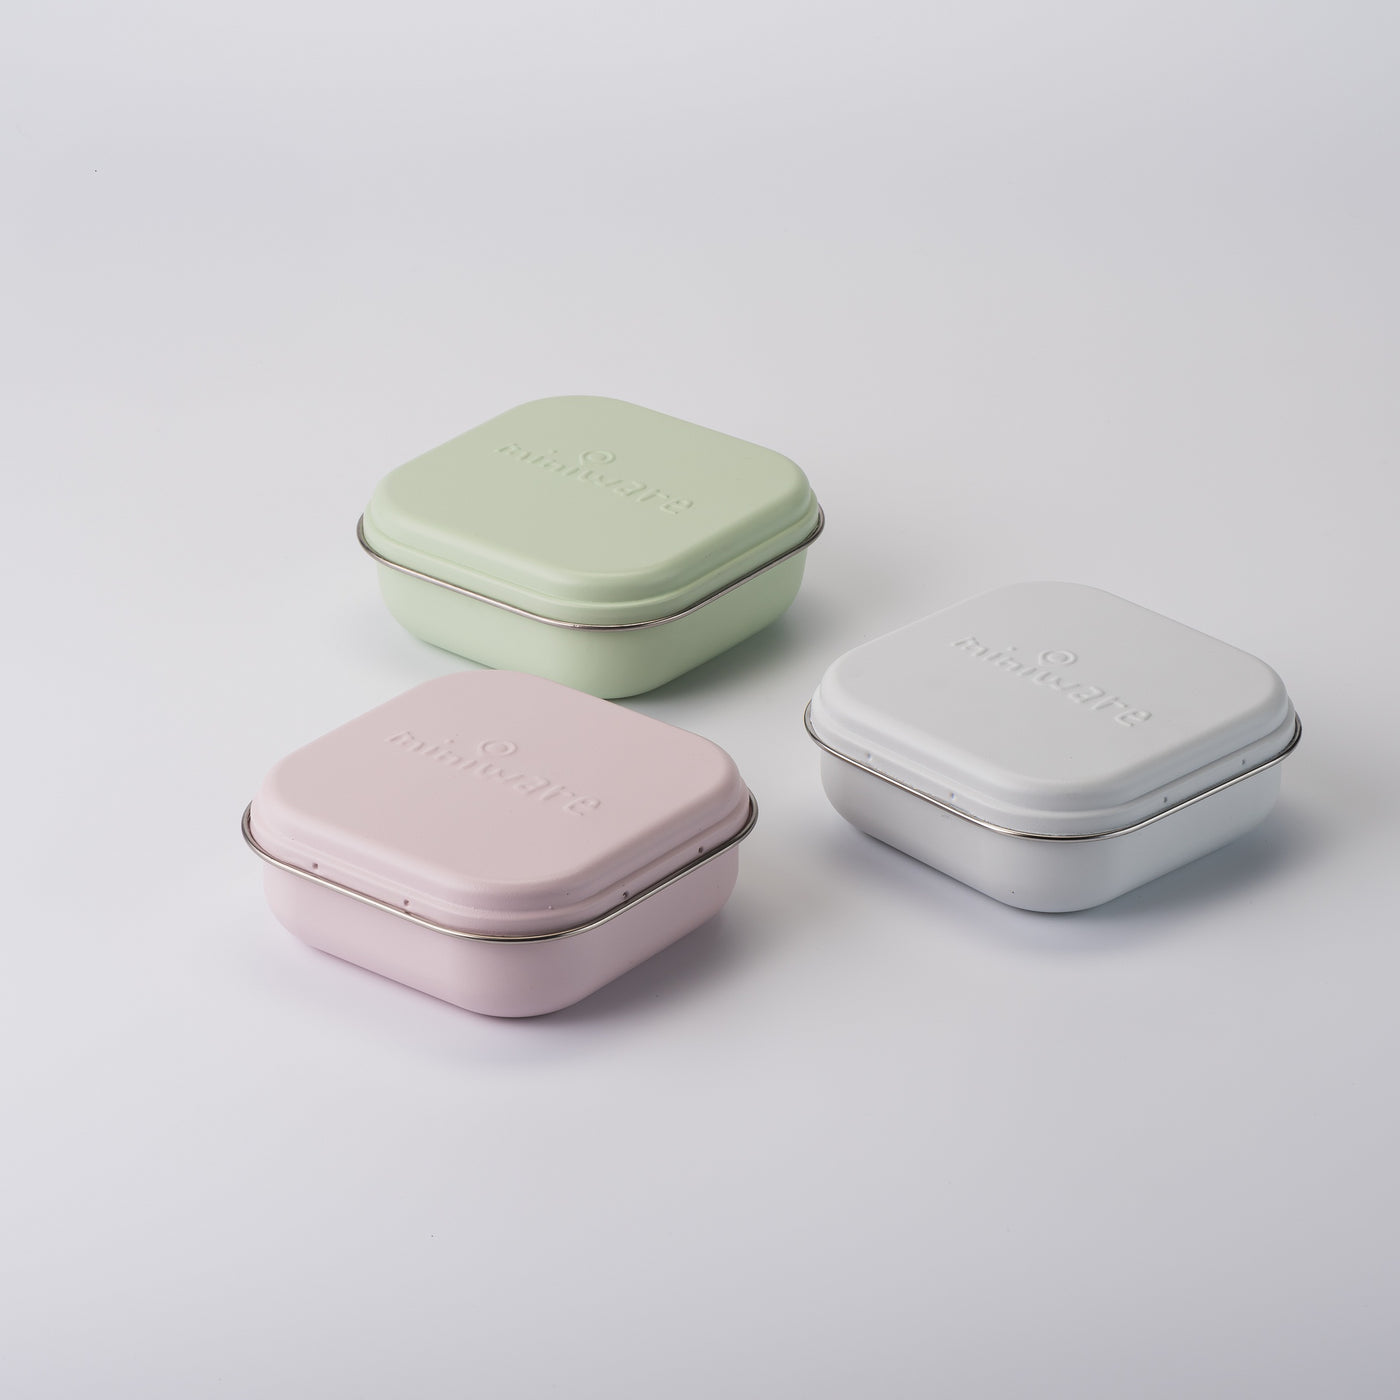 Bento Lunch Box with 2 silipods - White | Miniware